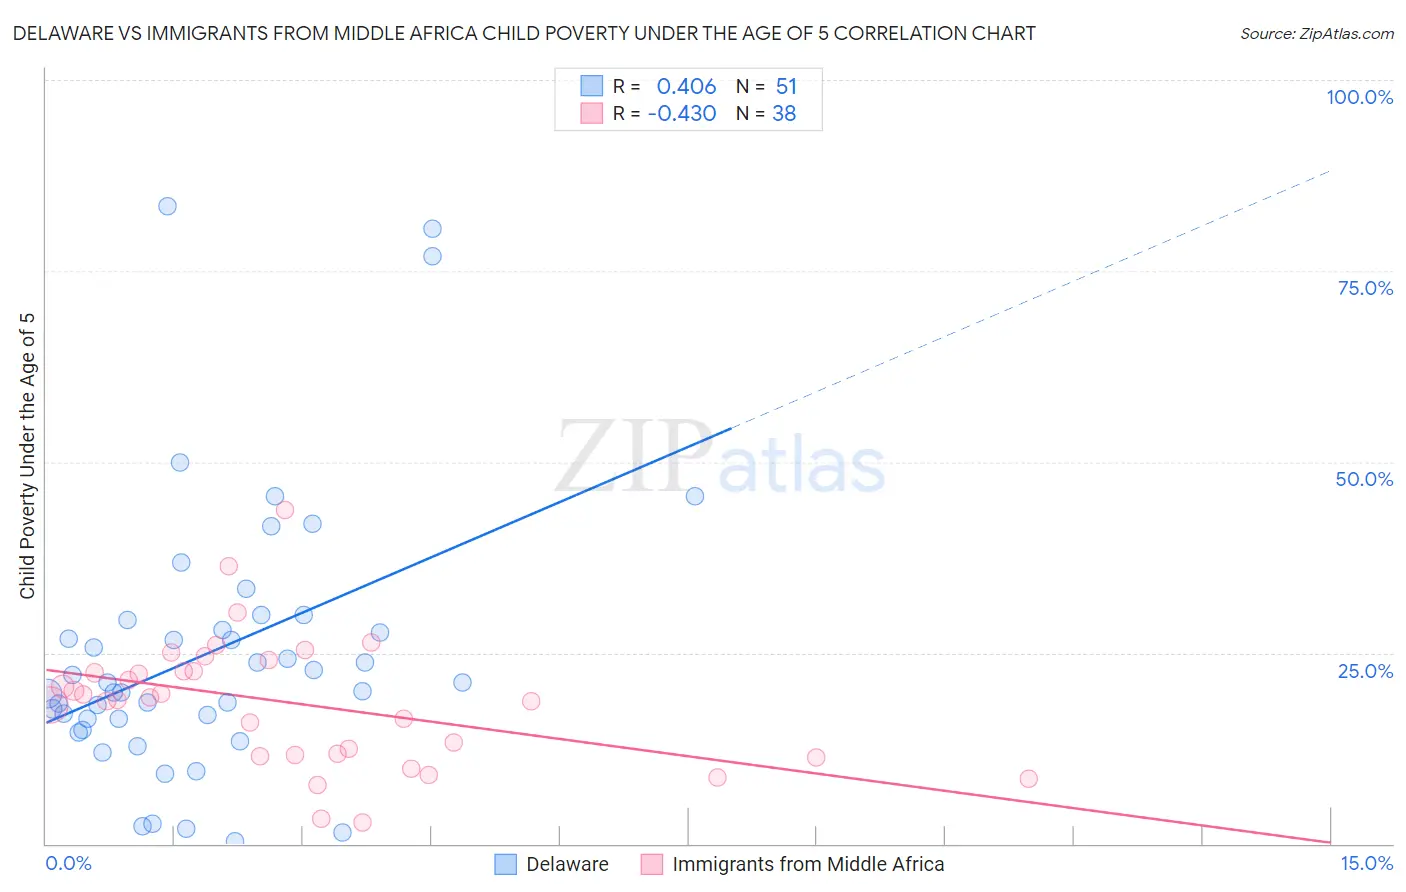 Delaware vs Immigrants from Middle Africa Child Poverty Under the Age of 5